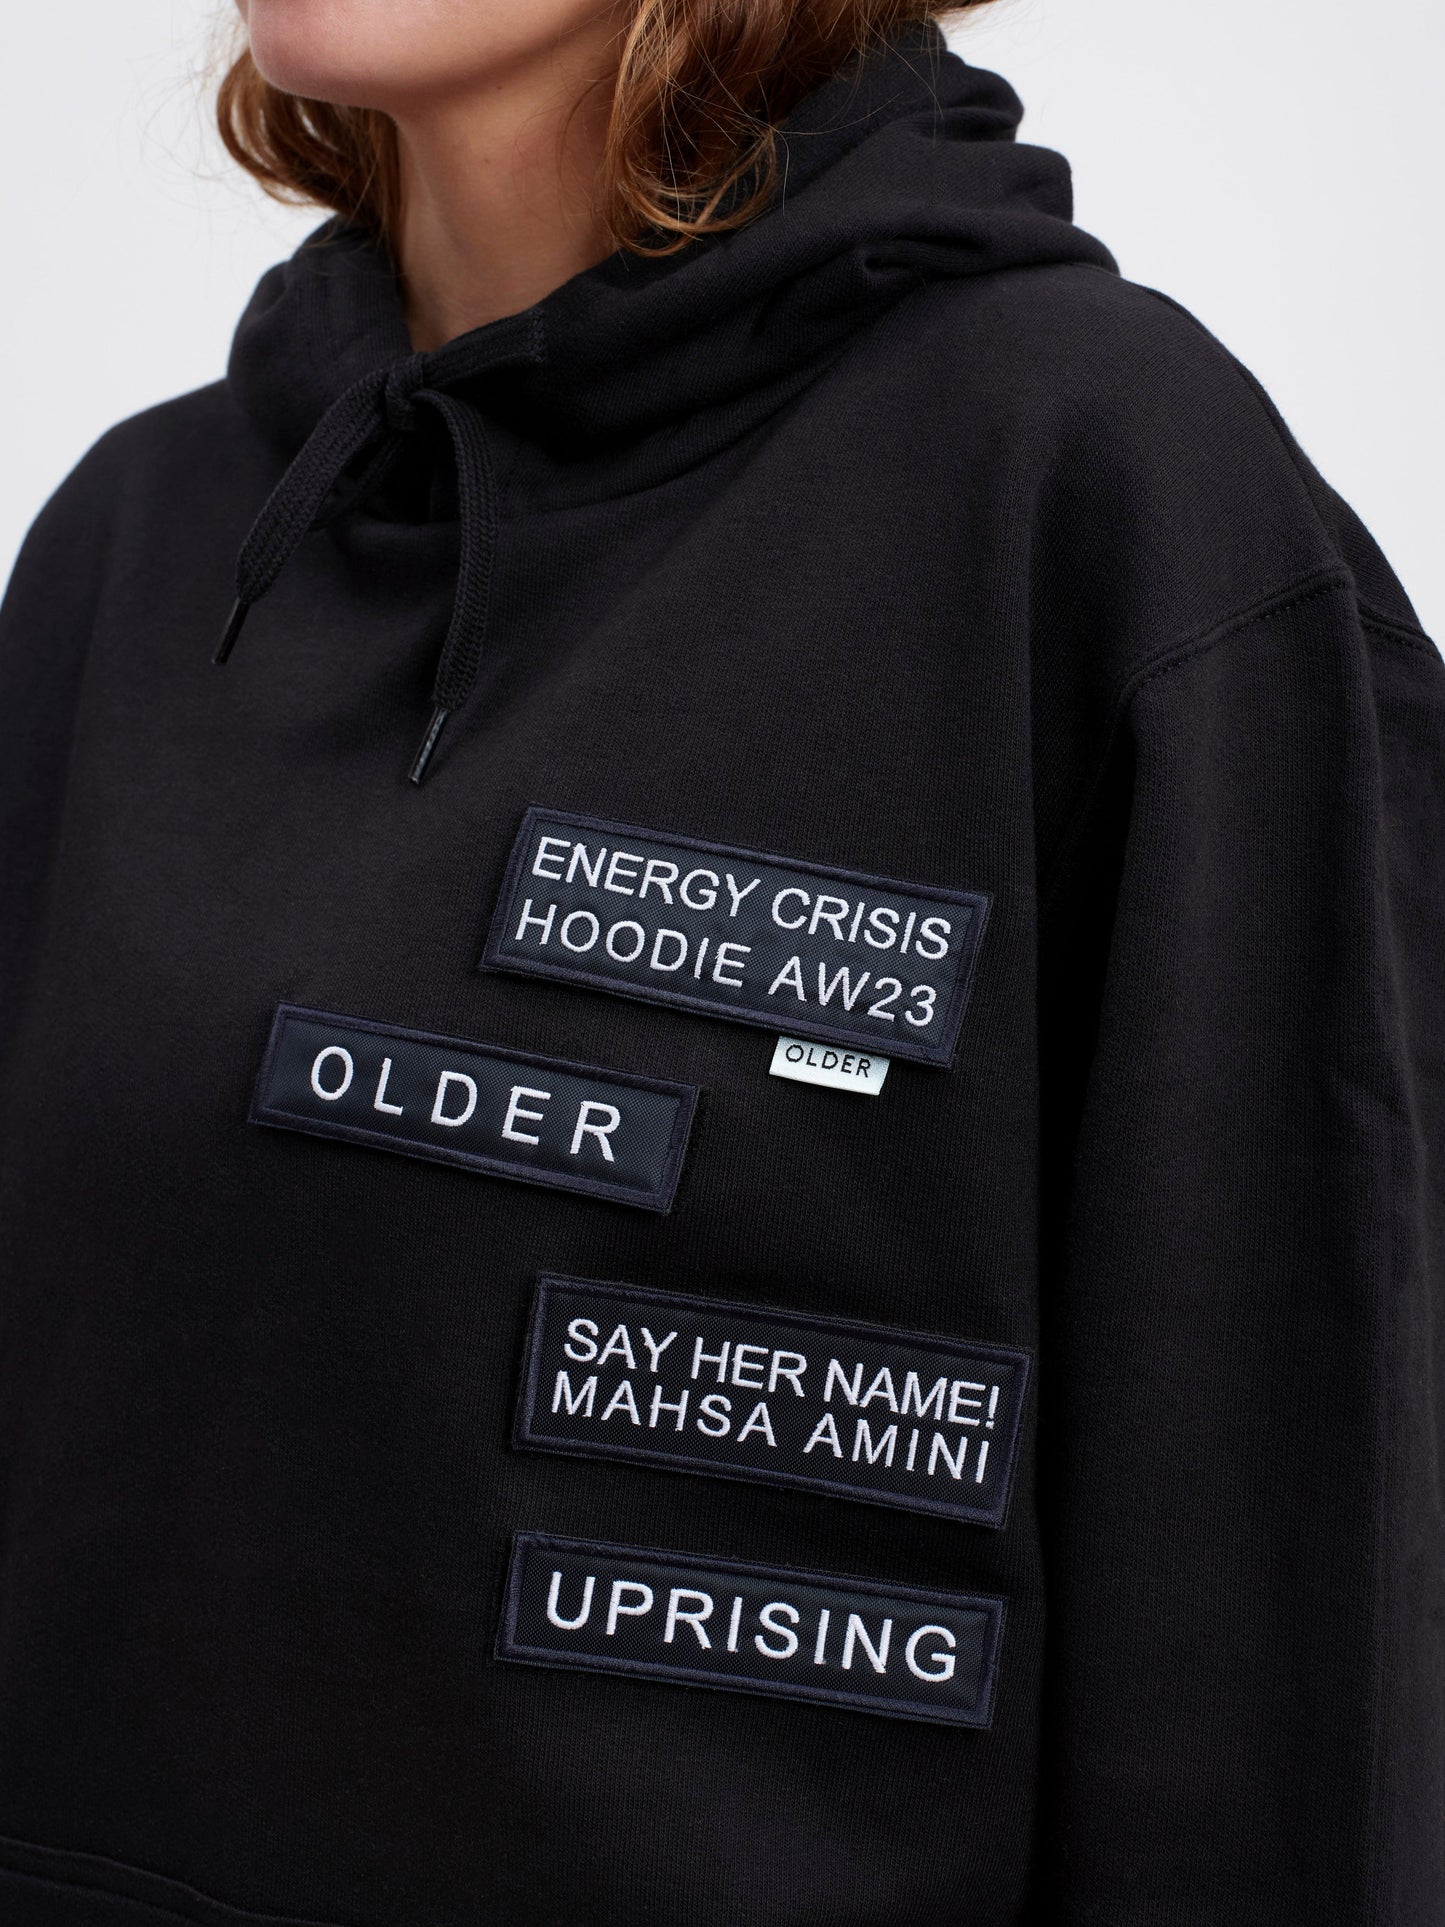 The Message Hoodie